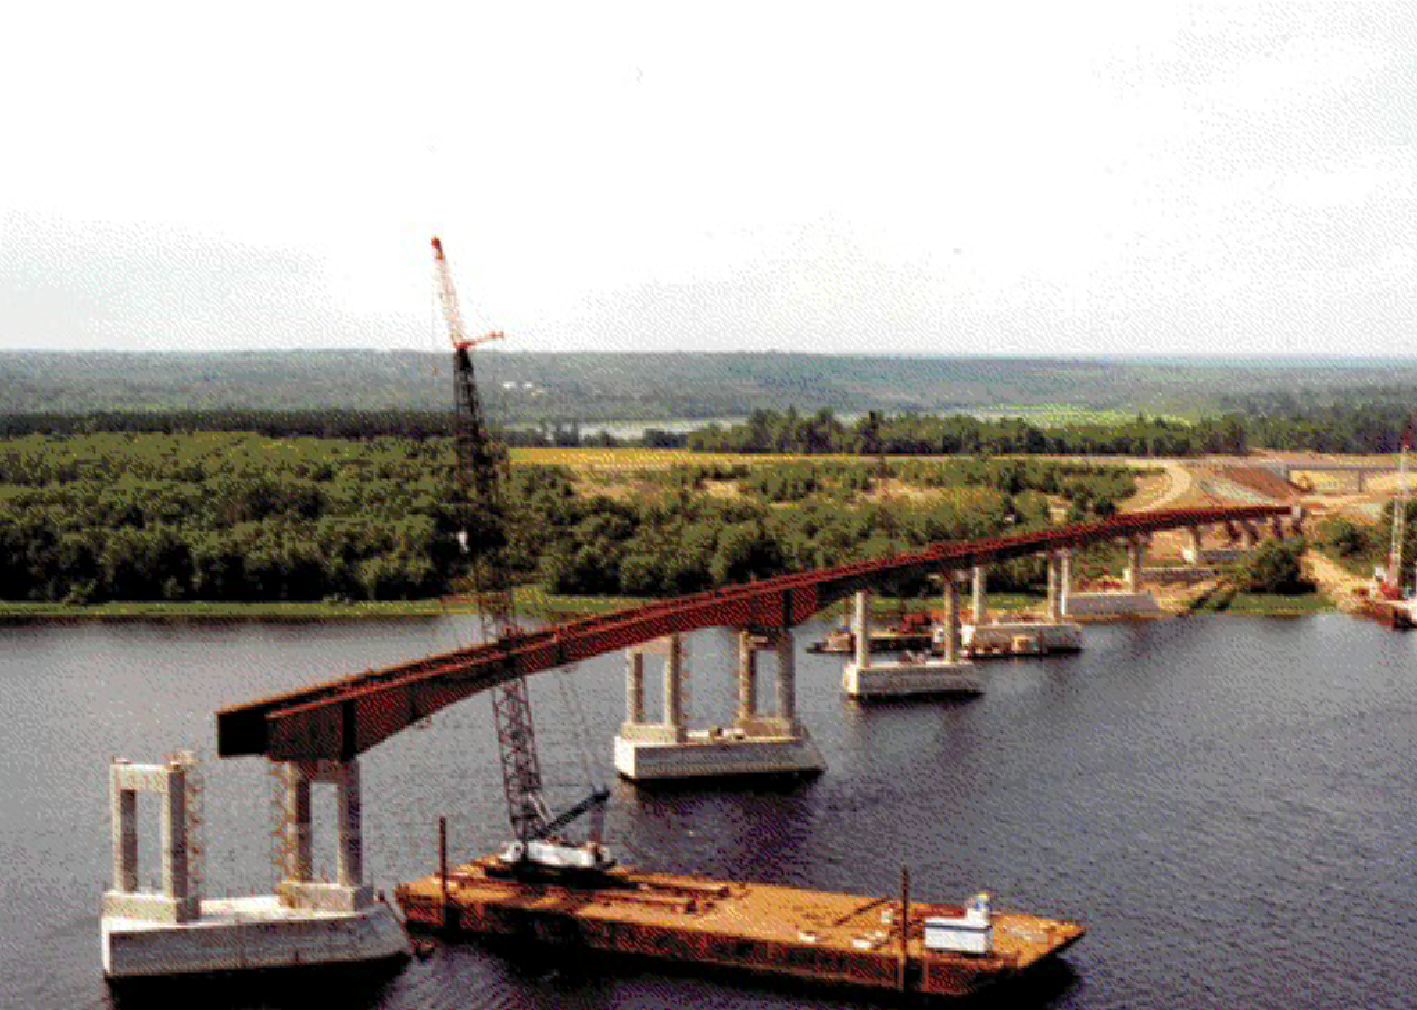 Saint John River Bridge during construction, stretching over a 60-metre channel with 14 spans.